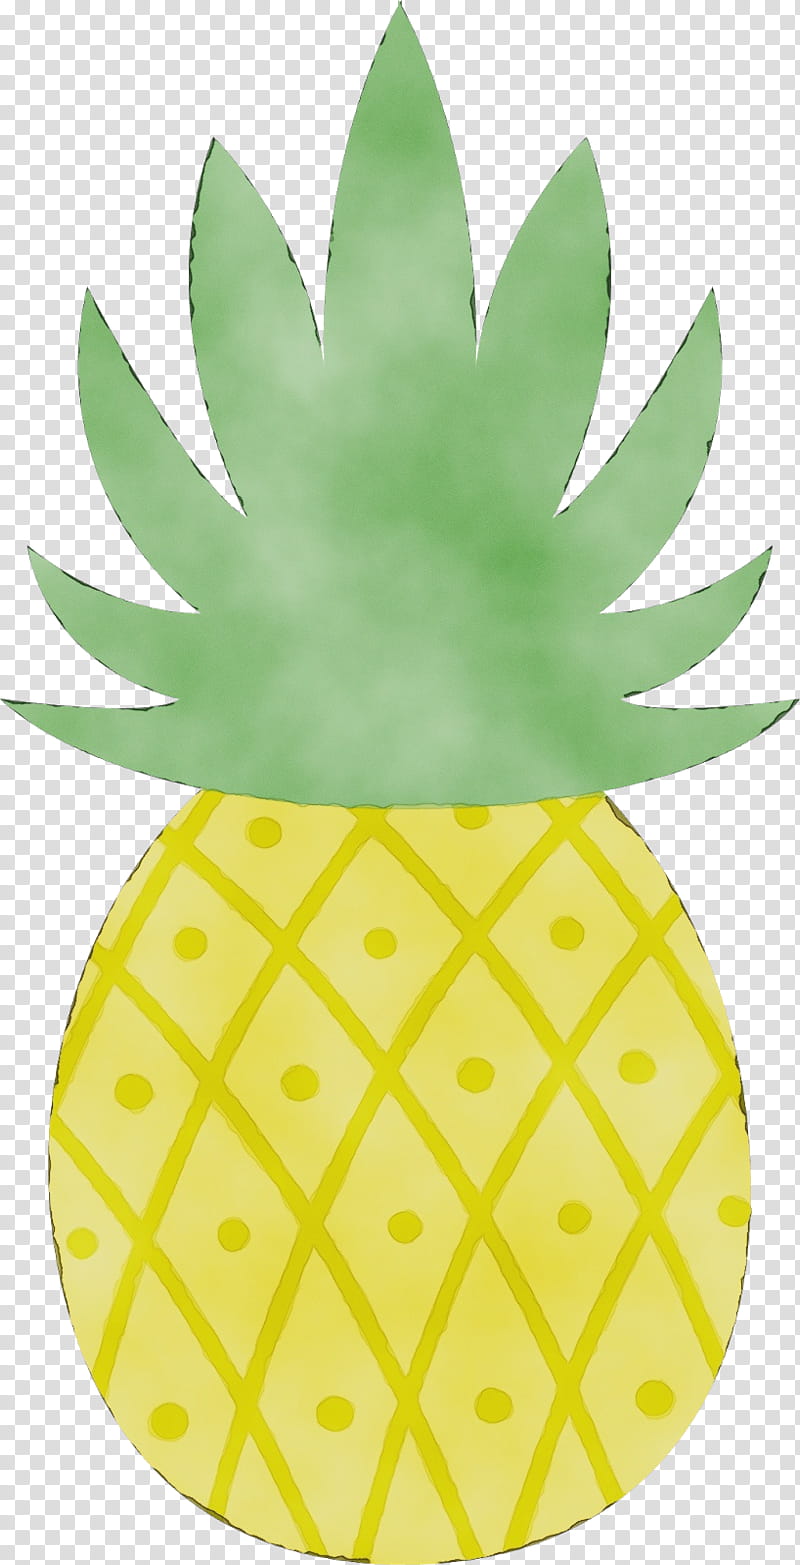 Pineapple, Watercolor, Paint, Wet Ink, Ananas, Green, Yellow, Fruit transparent background PNG clipart